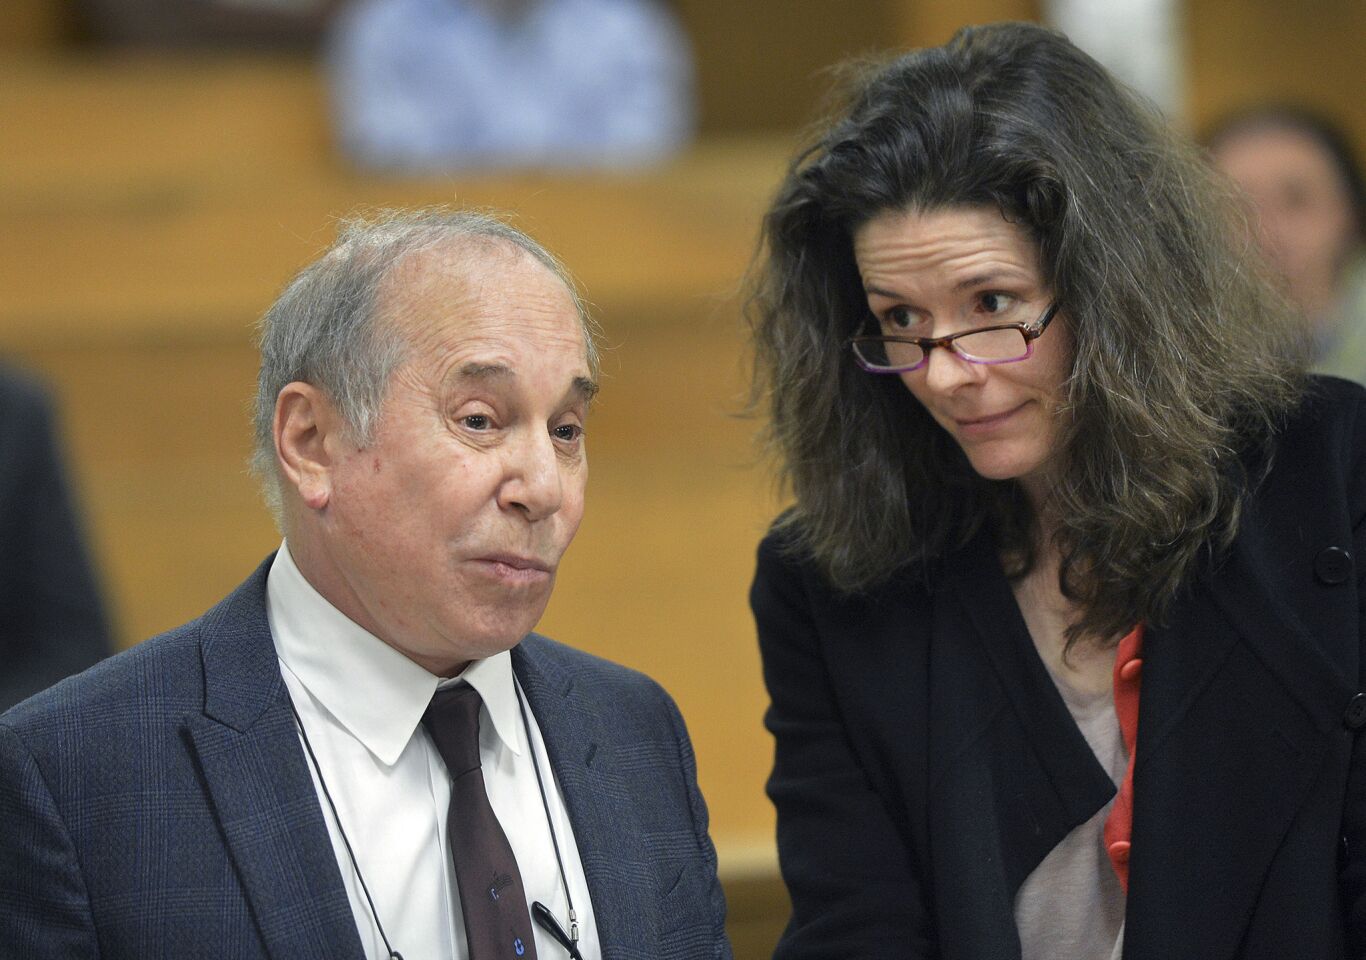 Paul Simon and wife Edie Brickell were charged with misdemeanor disorderly conduct in April 2014 after police responded to a 911 hang-up call that came from their property. He reportedly told police that she'd slapped him and he'd shoved her and called 911. In January 2015, after 13 months of good behavior by the couple, the charges were dropped.